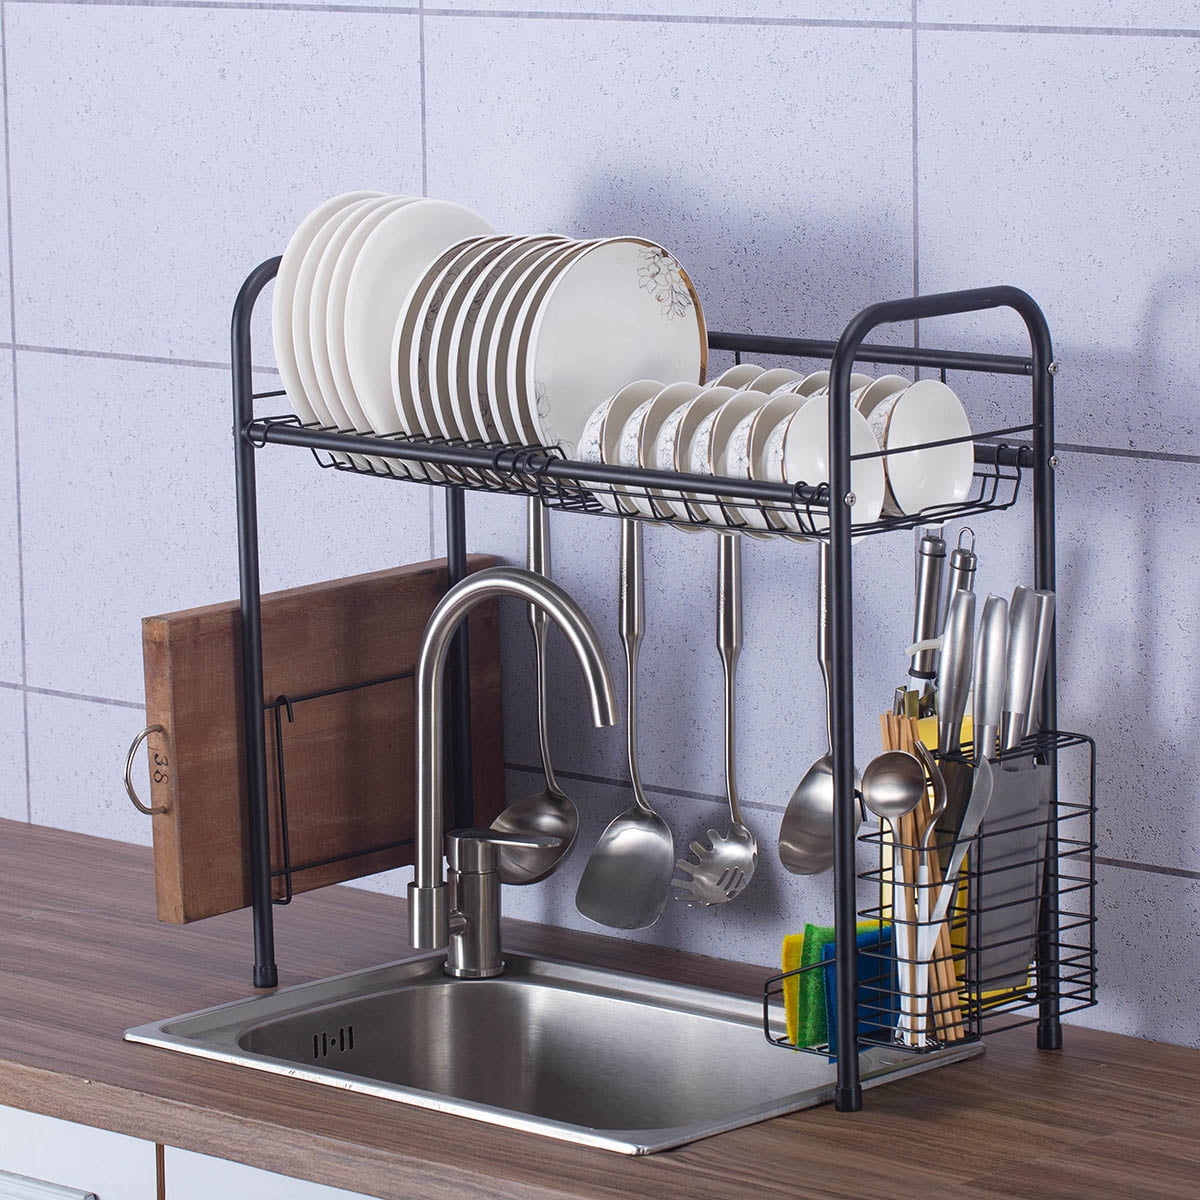 Stainless Steel Dish Drying Rack, Over Sink Drainer Shelf Storage Rack Stainless Steel Sink Drying Rack